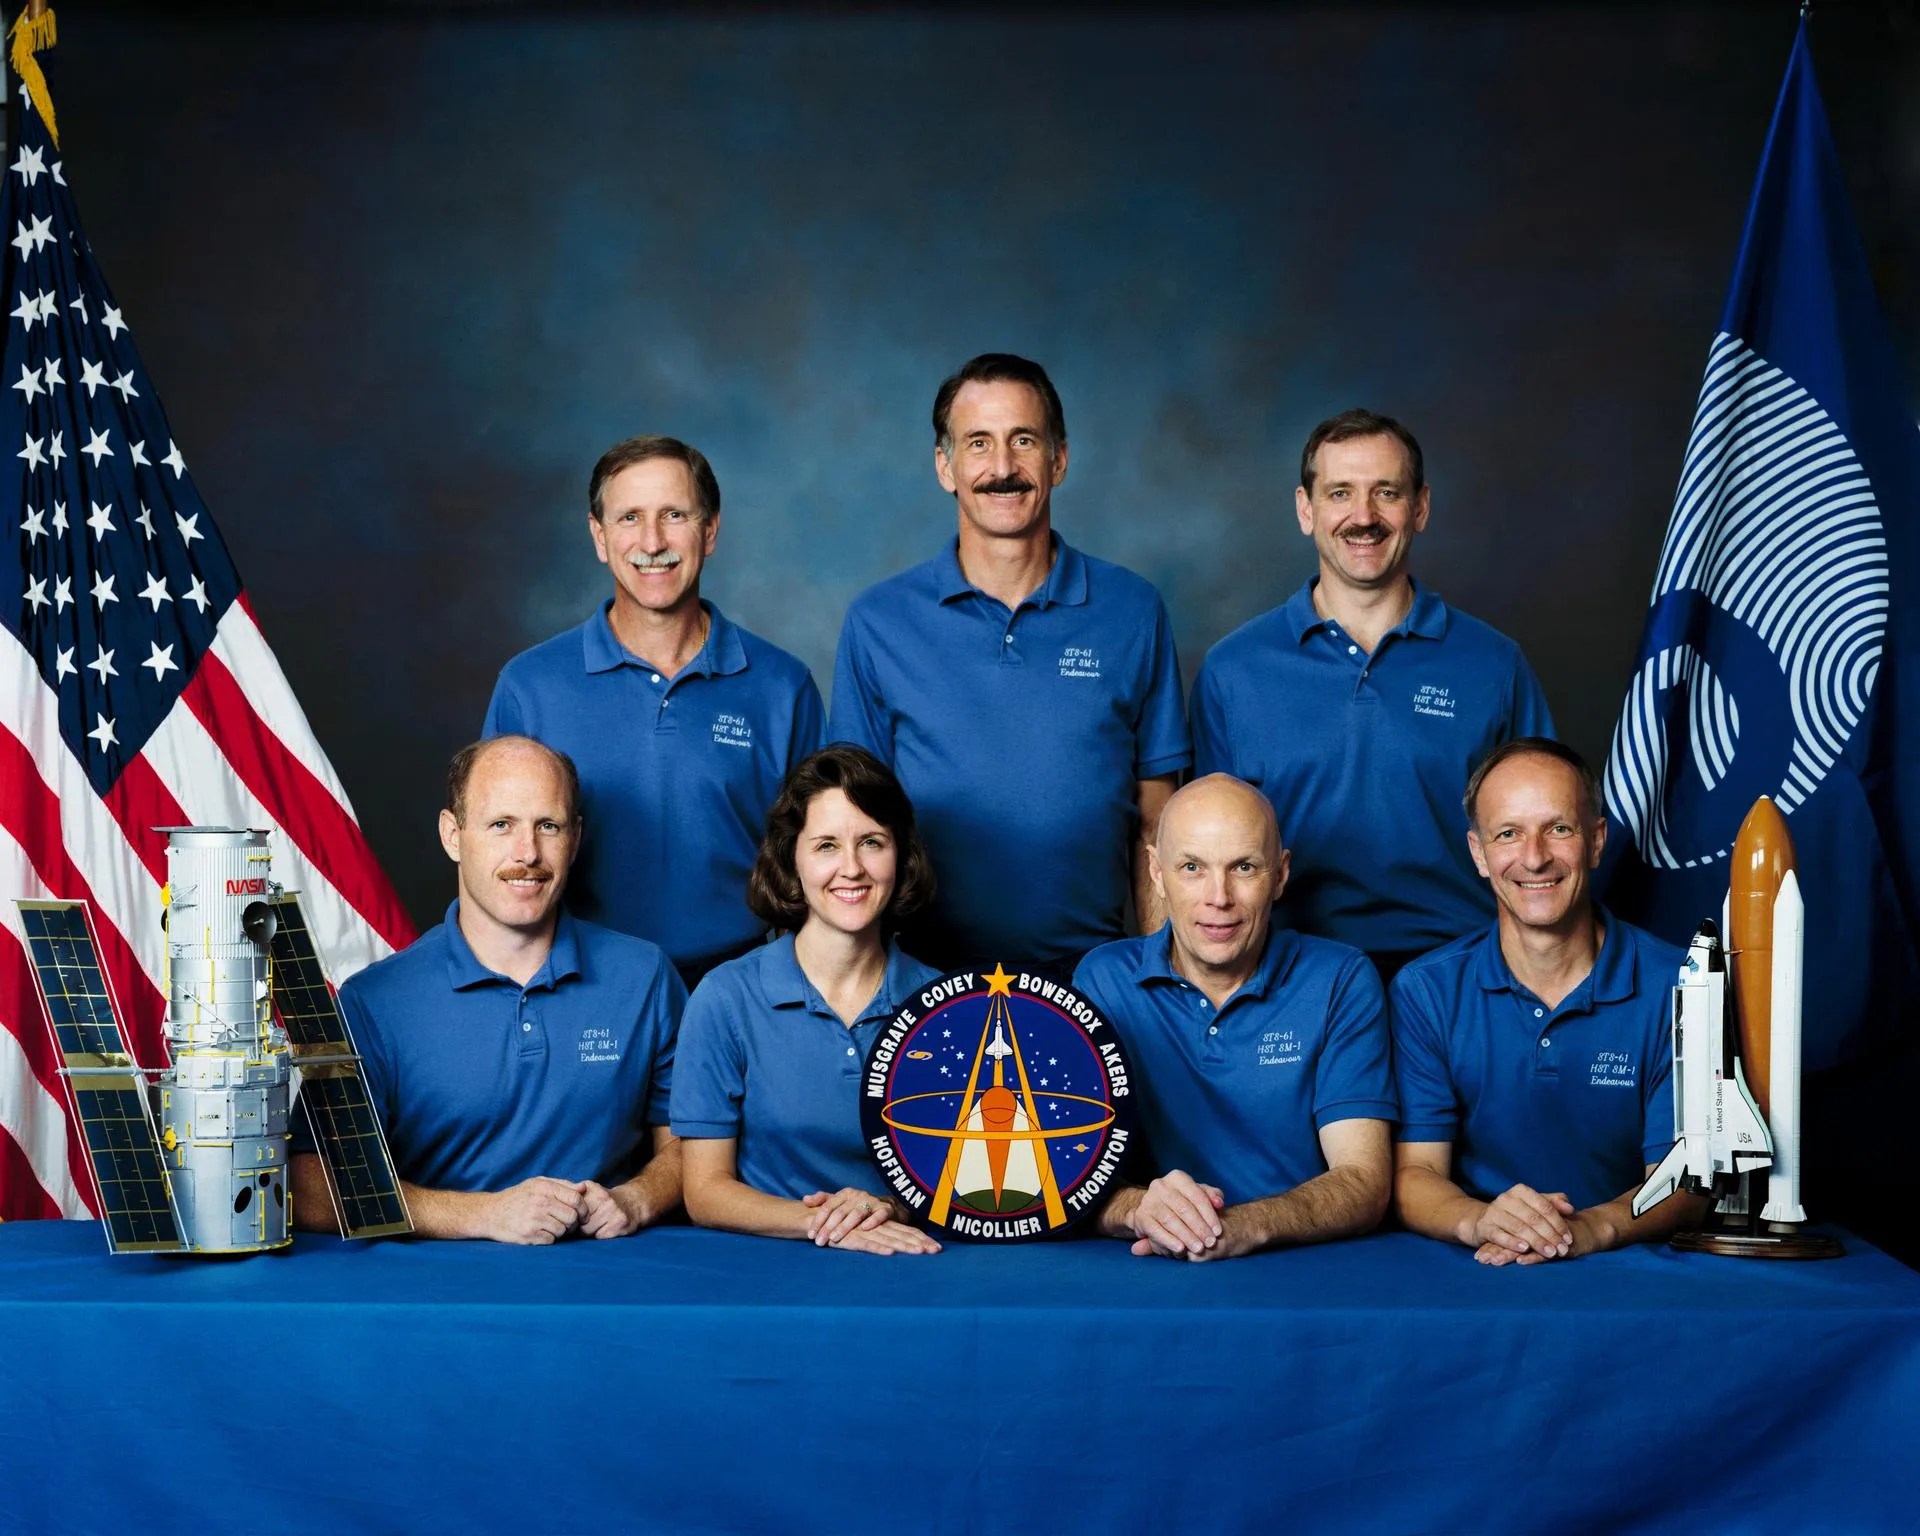 Seven astronauts wear blue T-shirts: three men standing in the back row, and three men and one woman sitting at the table in the front row. On either side of them are US and ESA flags, and models of the space shuttle and the Hubble telescope.